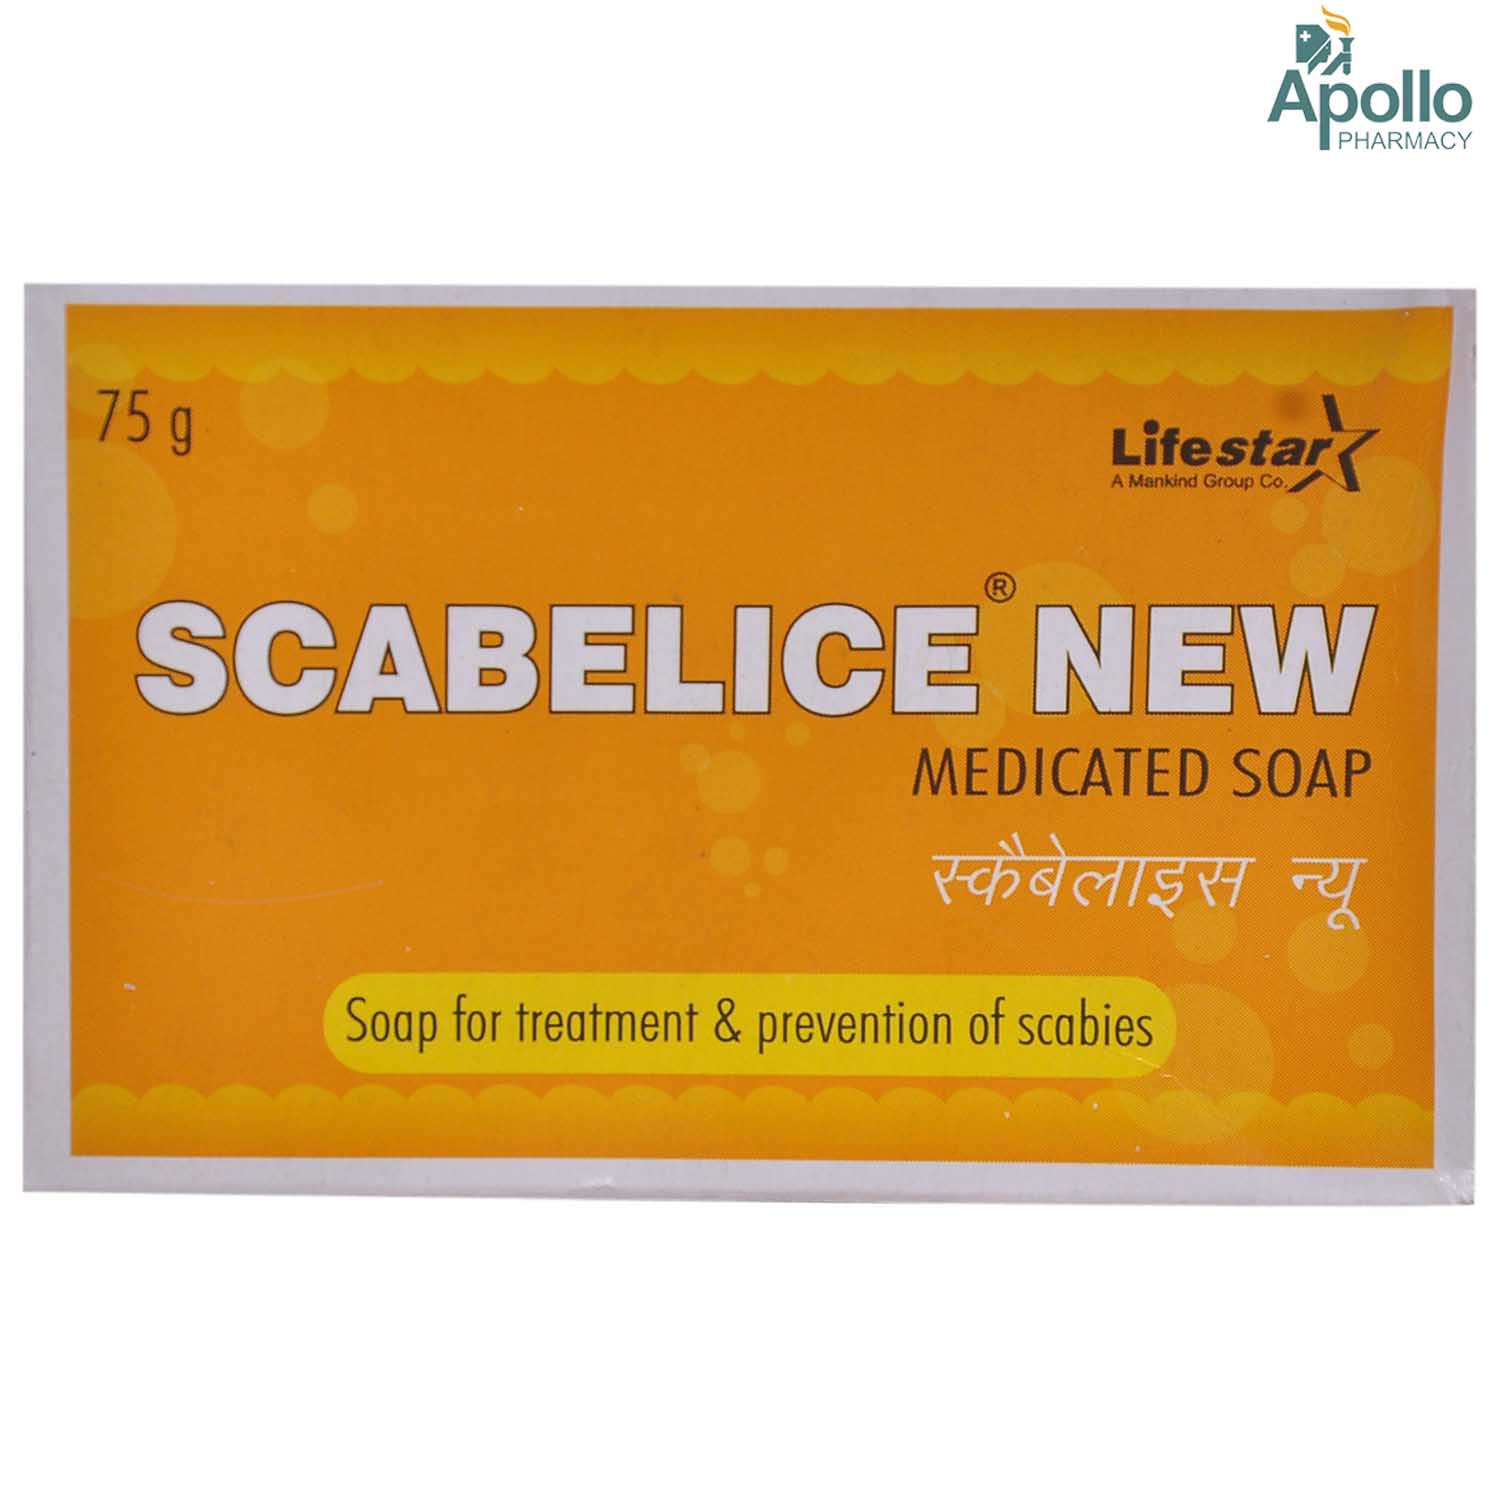 Buy Scabelice new Medicated Soap, 75 gm Online